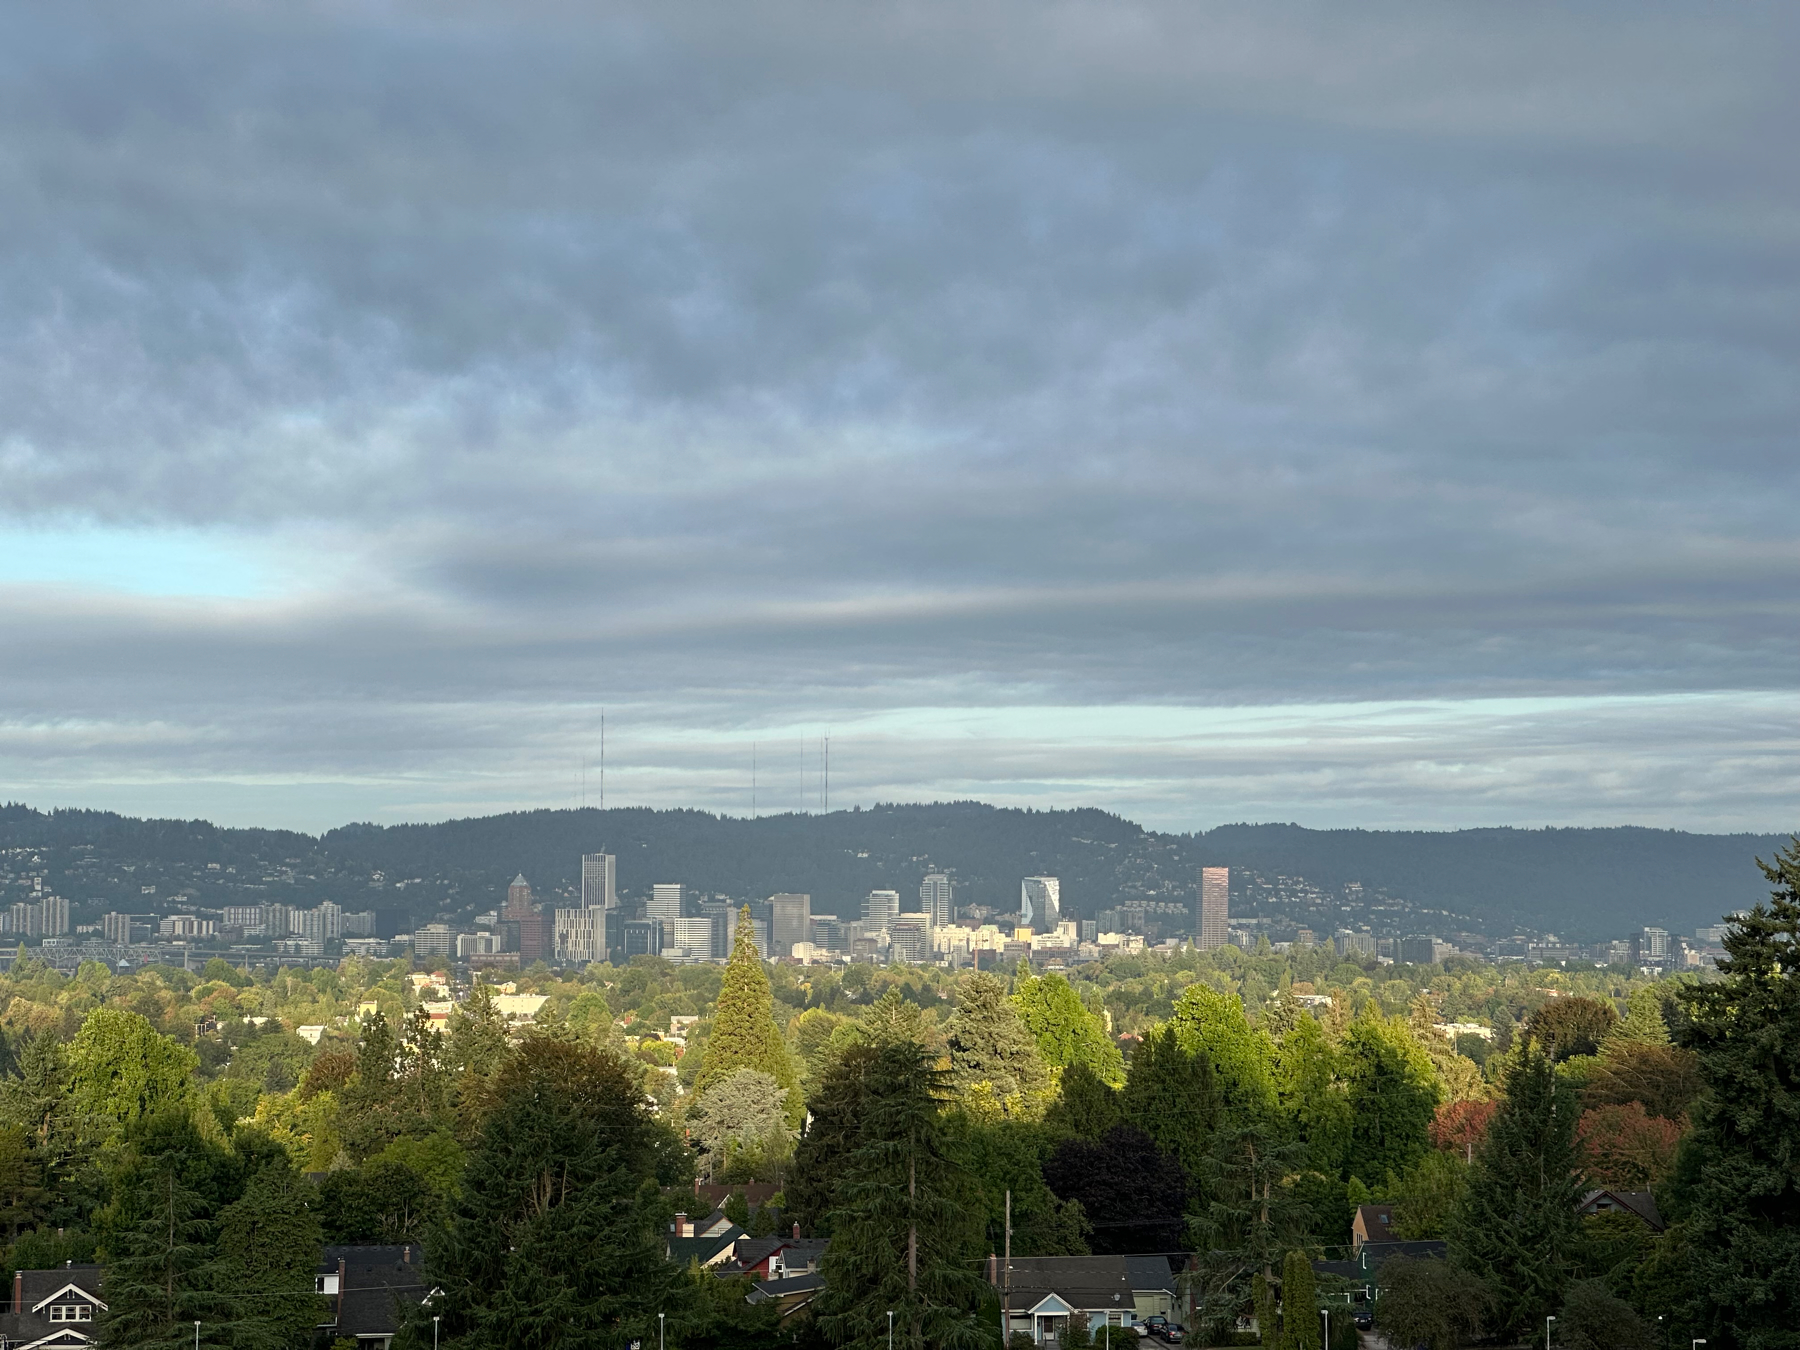 View of downtown buildings in the distance, there’s gray clouds above with a hint of blue sky, and tall green trees in the foreground.